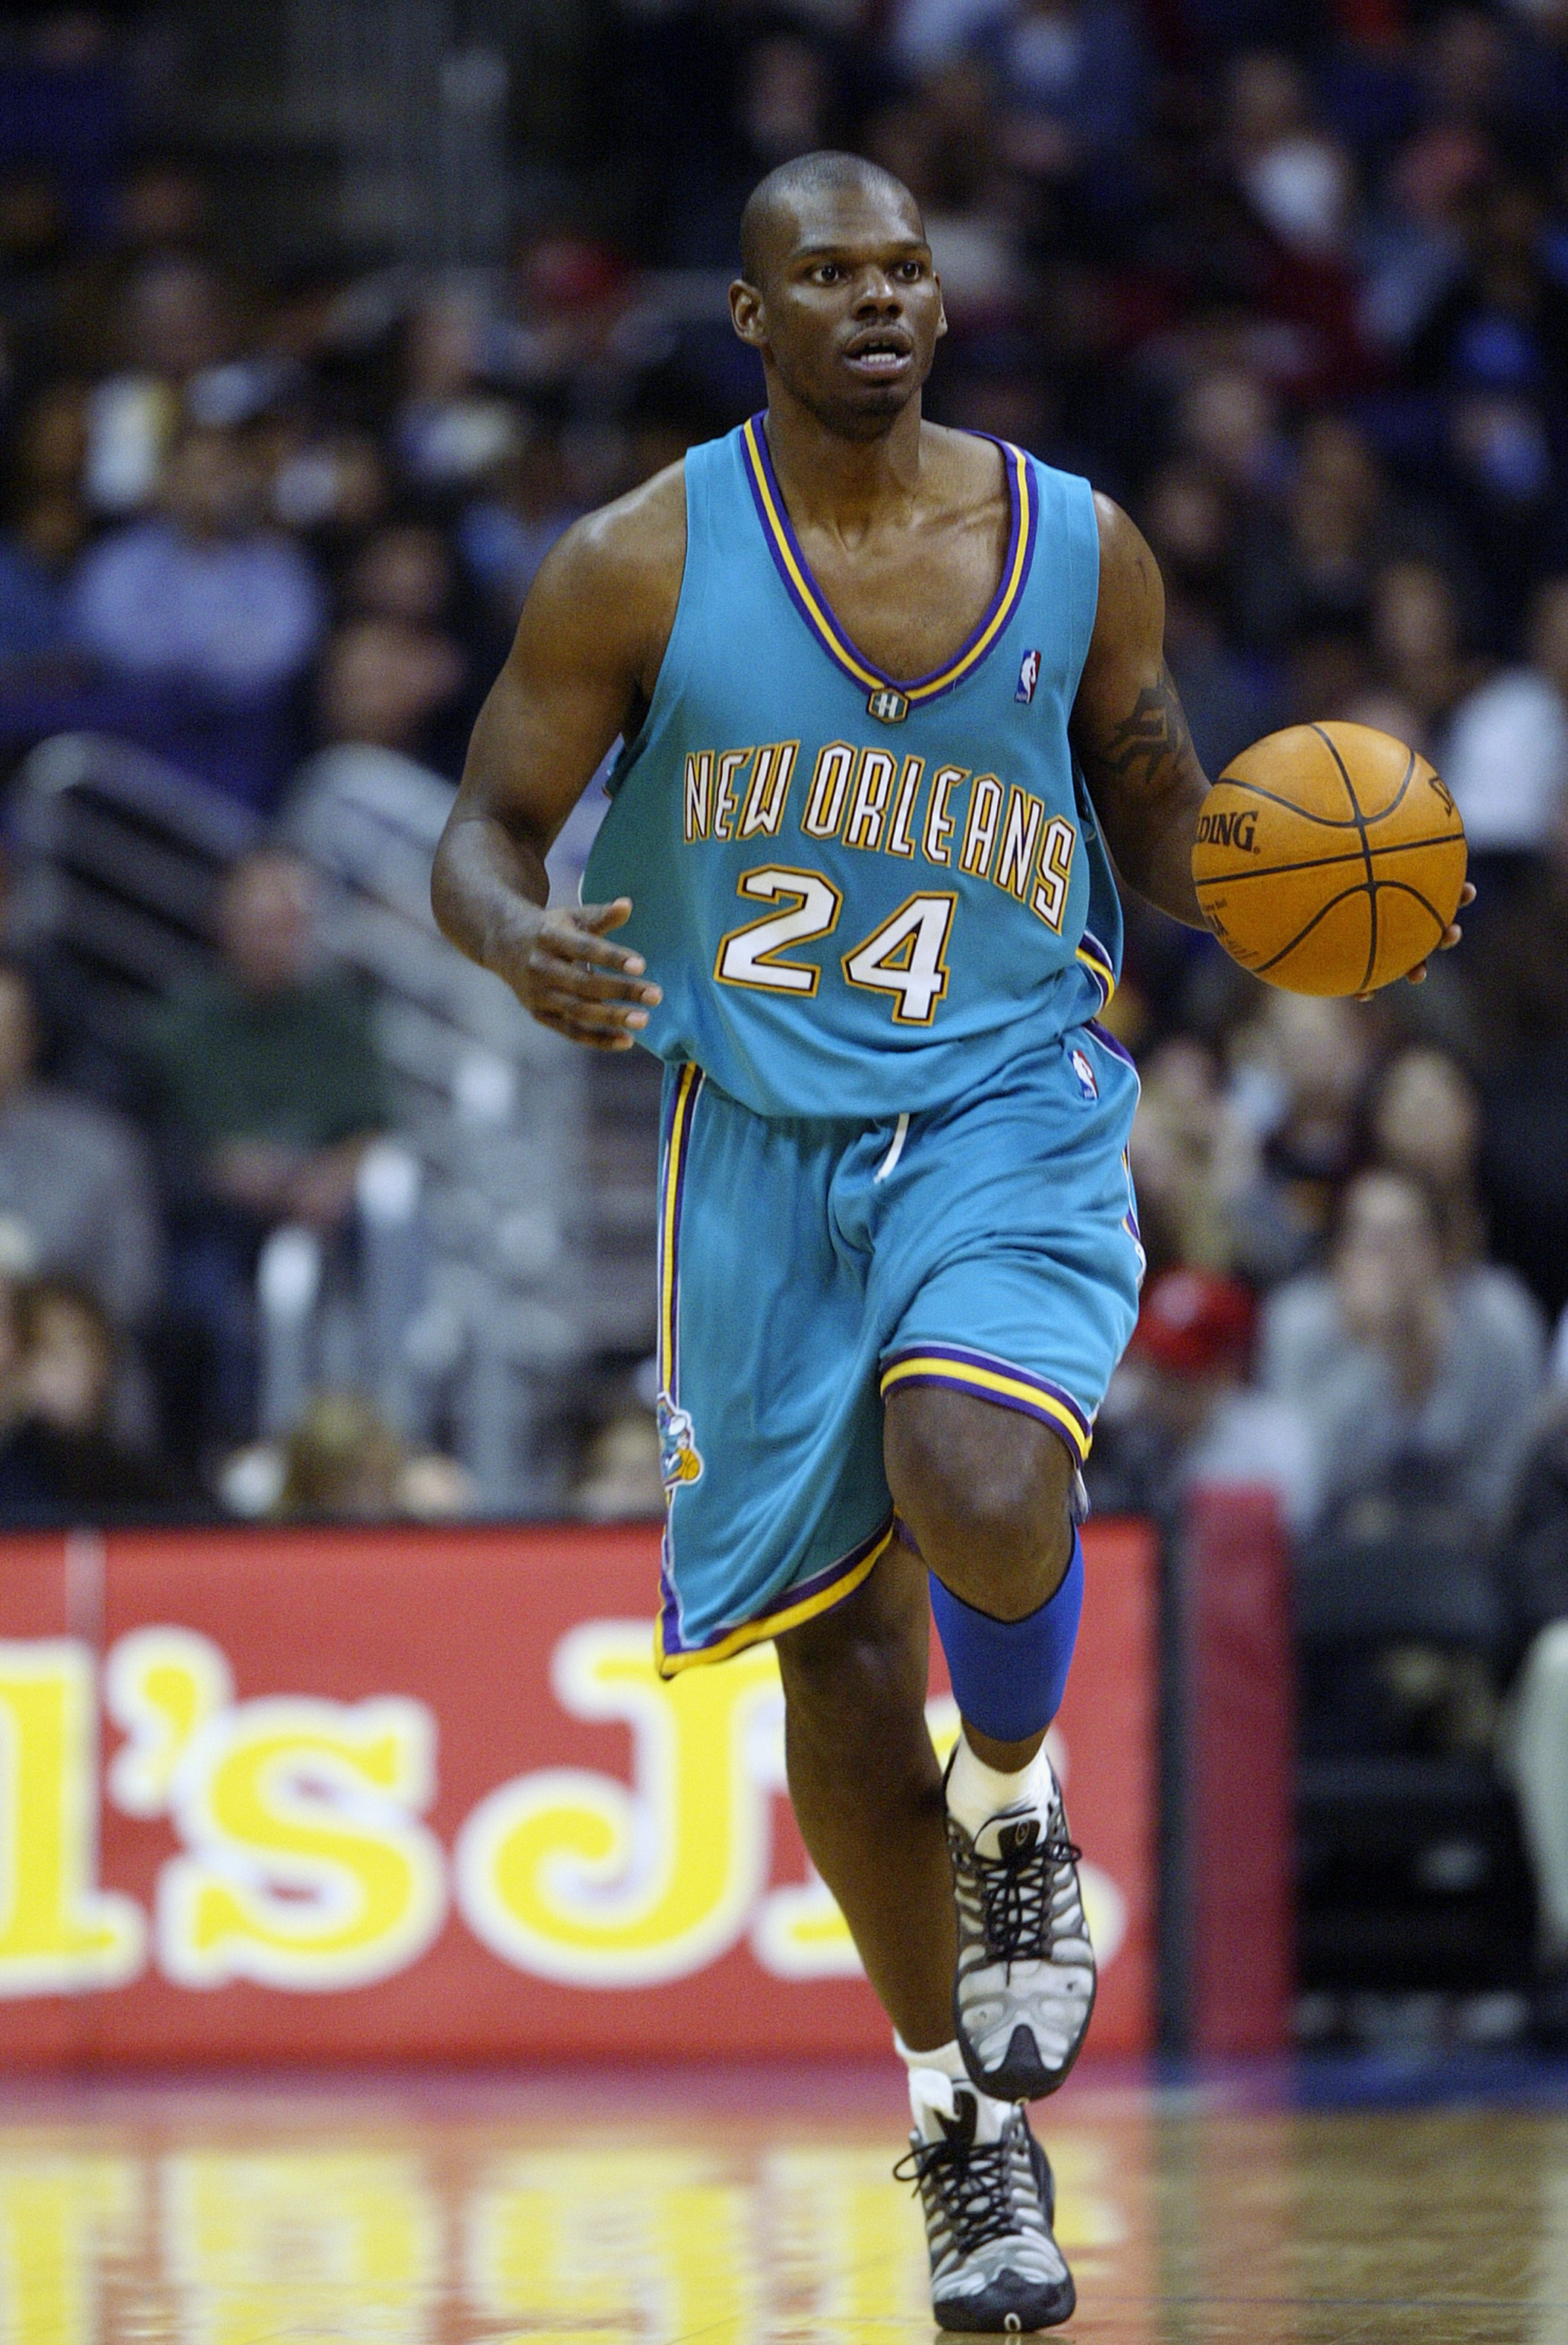 LOS ANGELES - MARCH 3:  Jamal Mashburn #24 of the New Orleans Hornets moves upcourt during the NBA game against the Los Angeles Clippers on March 3, 2003 at Staples Center in Los Angeles, California.  The Hornets won 111-108.  NOTE TO USER: User expressly